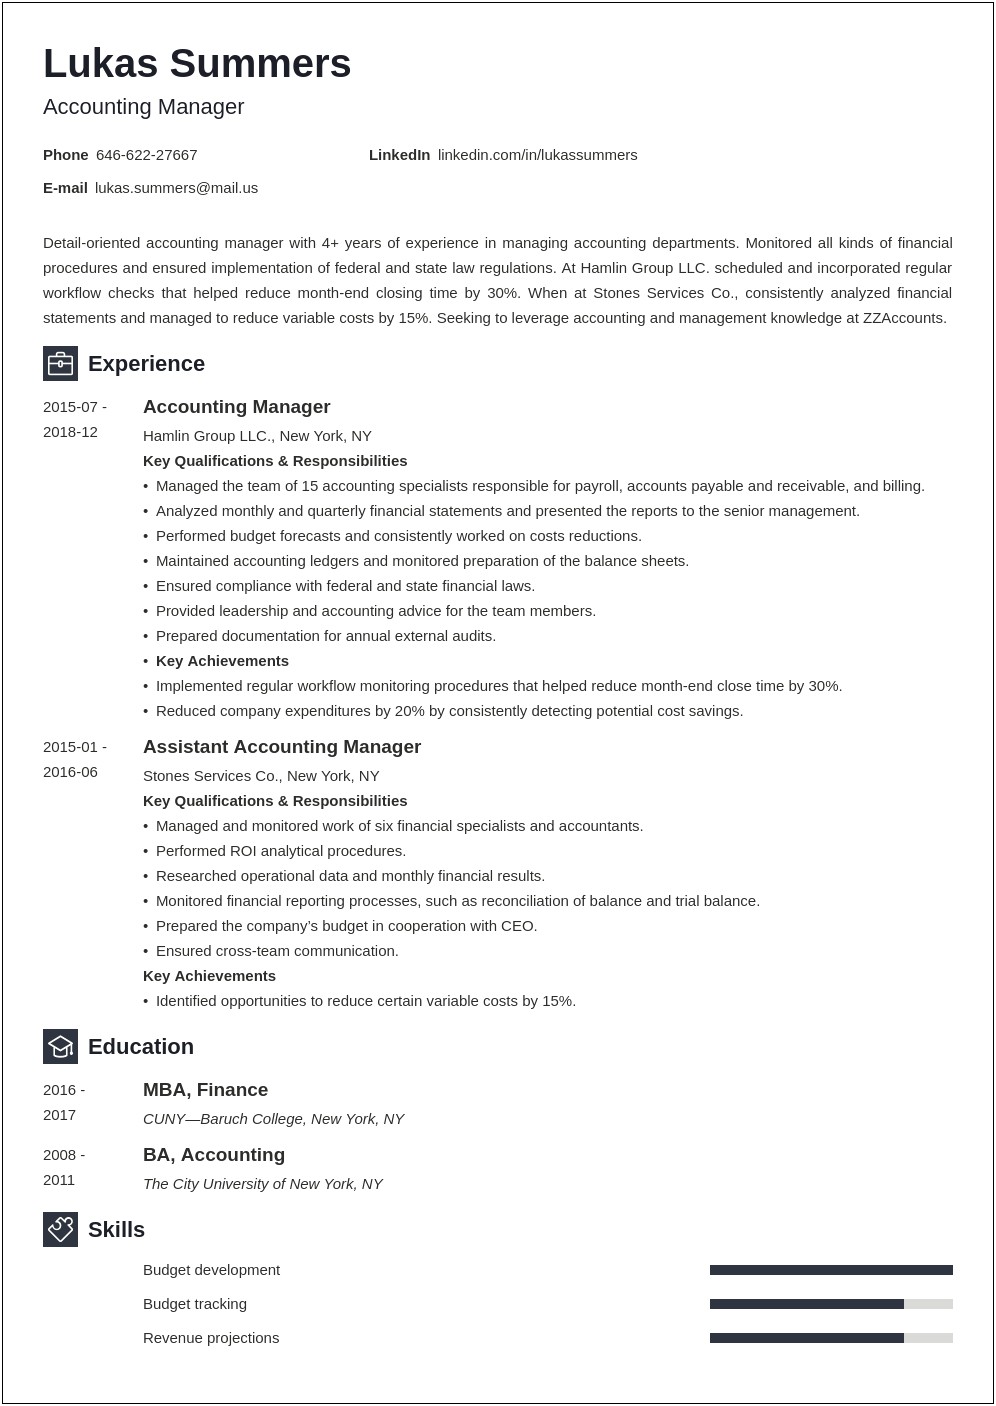 Resume With Knowledge Skills Abut Legers Accounting